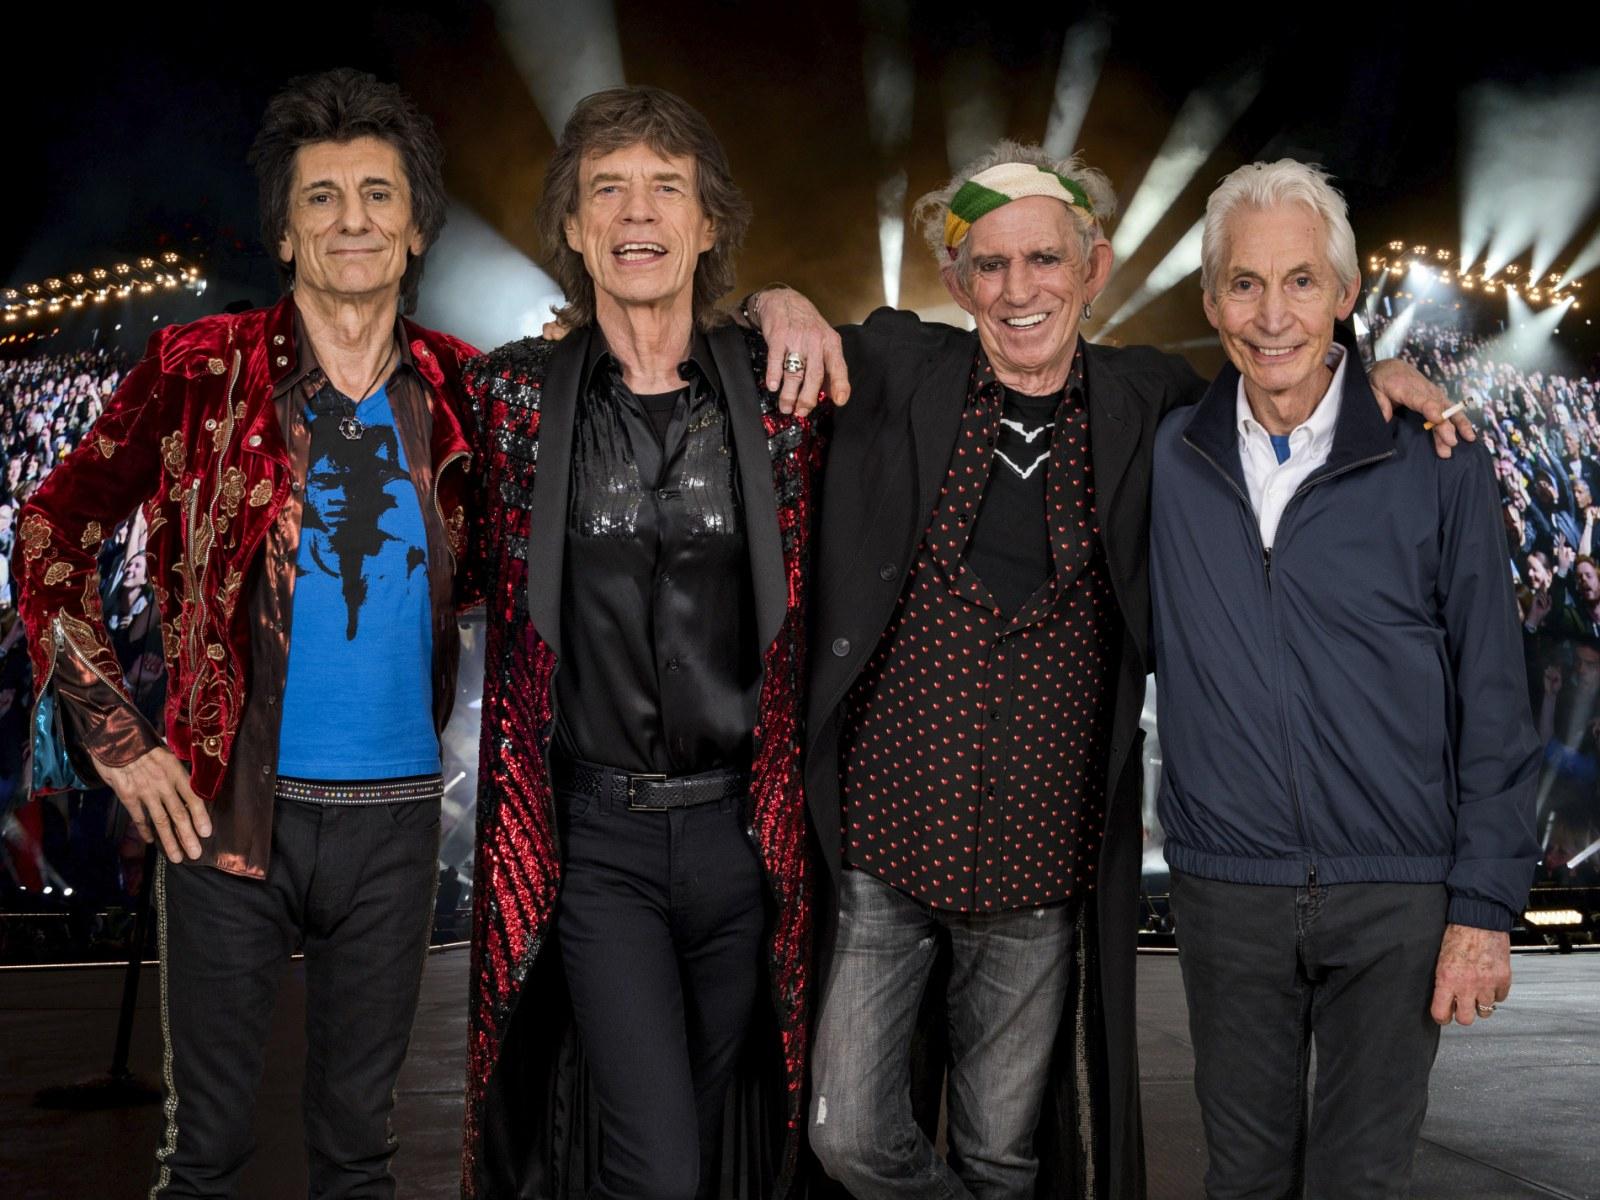 Rolling Stones Tour 2020 Wallpapers Wallpaper Cave